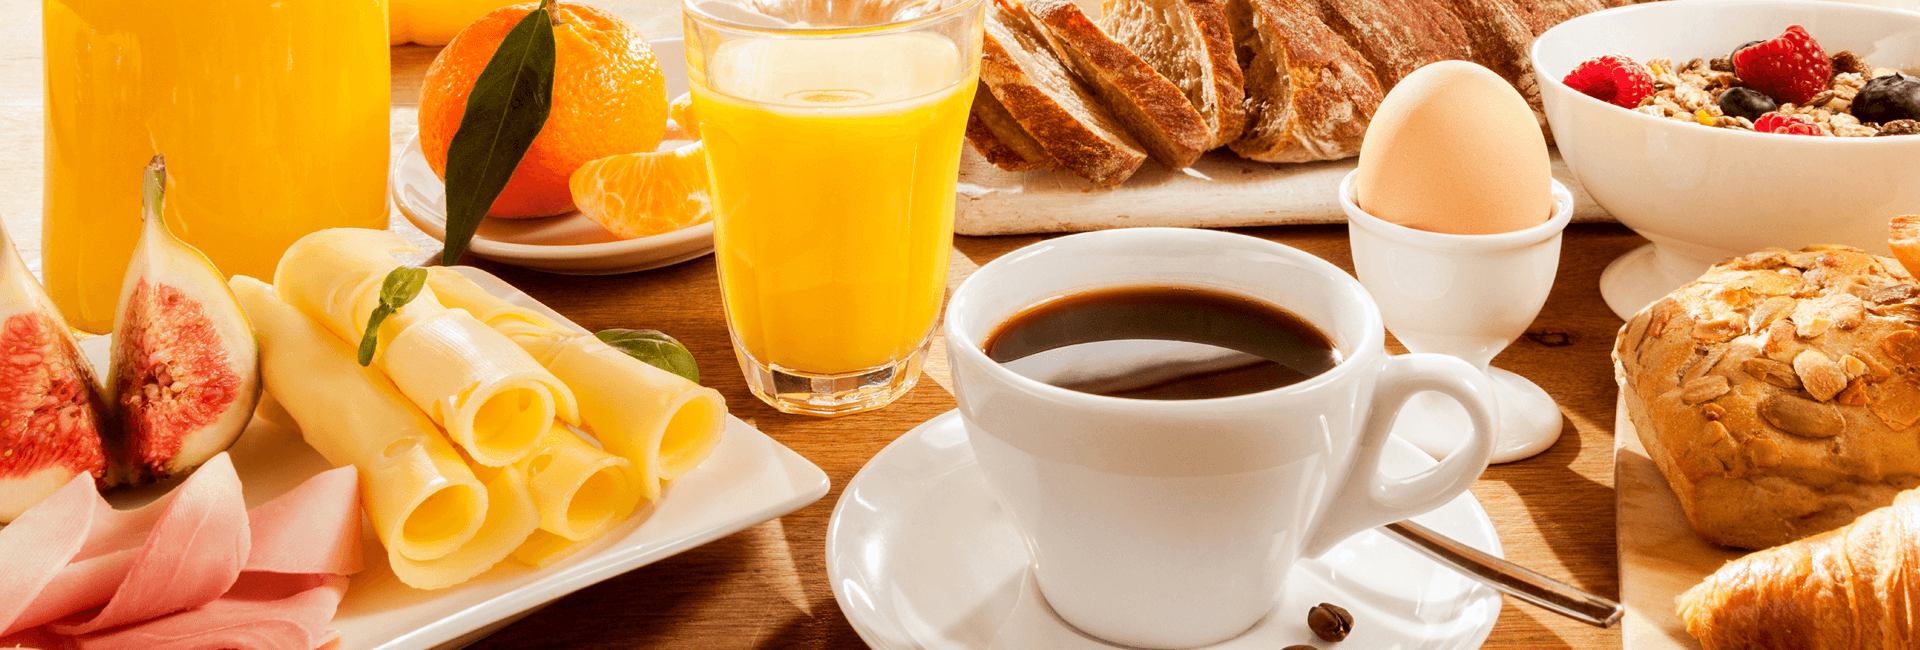 Brunch table with coffee, jus d'orange and an egg - brunch package Gasterij 't Karrewiel